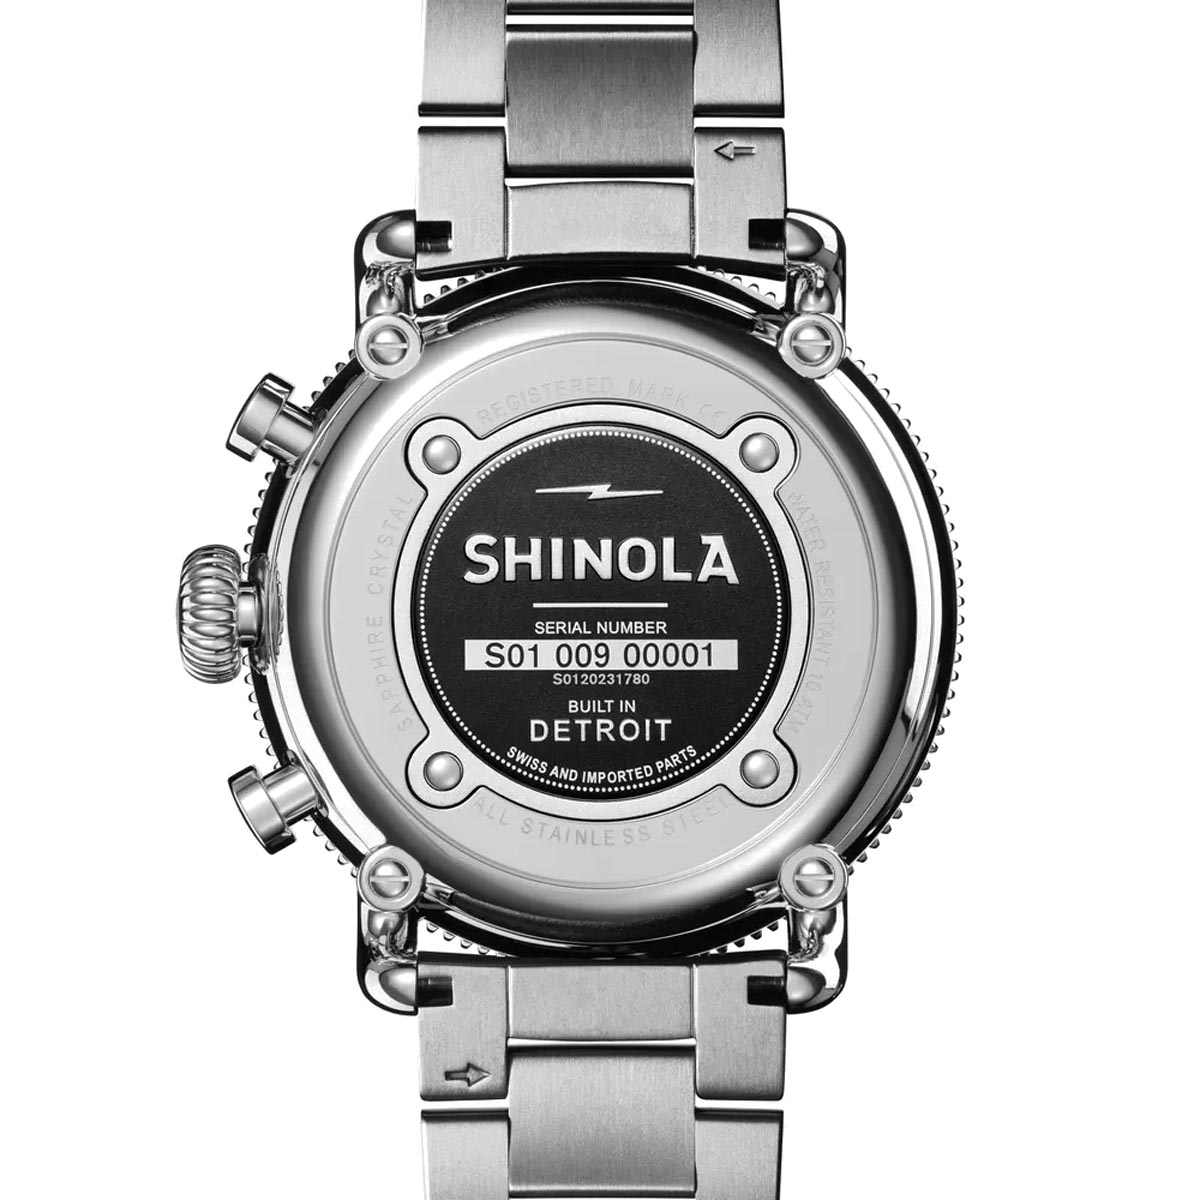 Shinola Runwell Sport Mens Chronograph Watch with Blue Dial and Stainless Steel Bracelet (quartz movement)